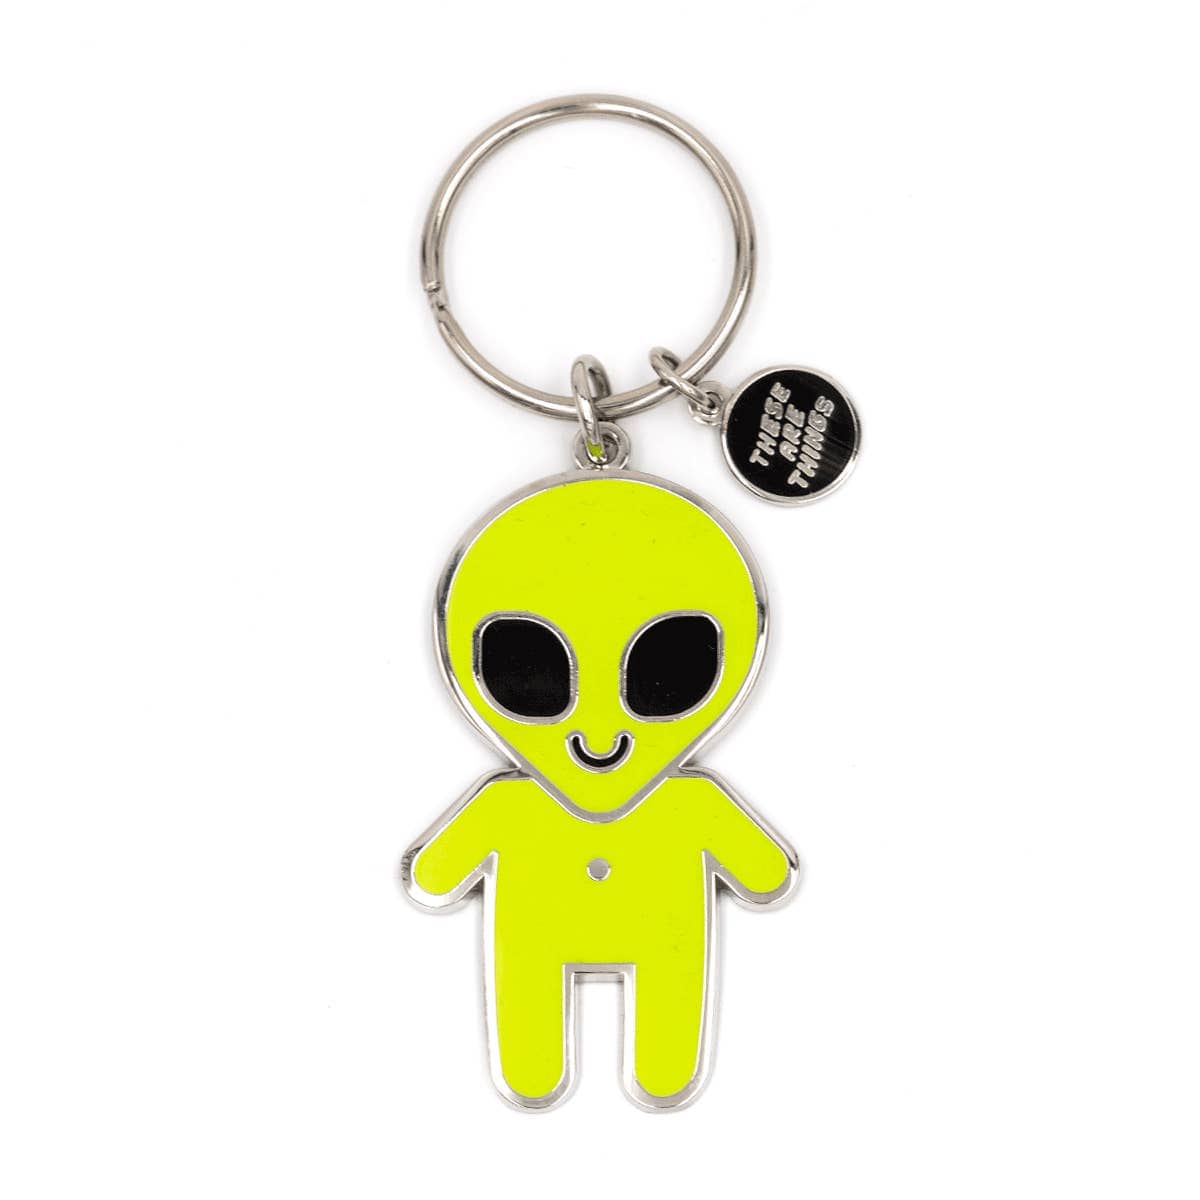 These are Things Alien Baby Enamel Keychain